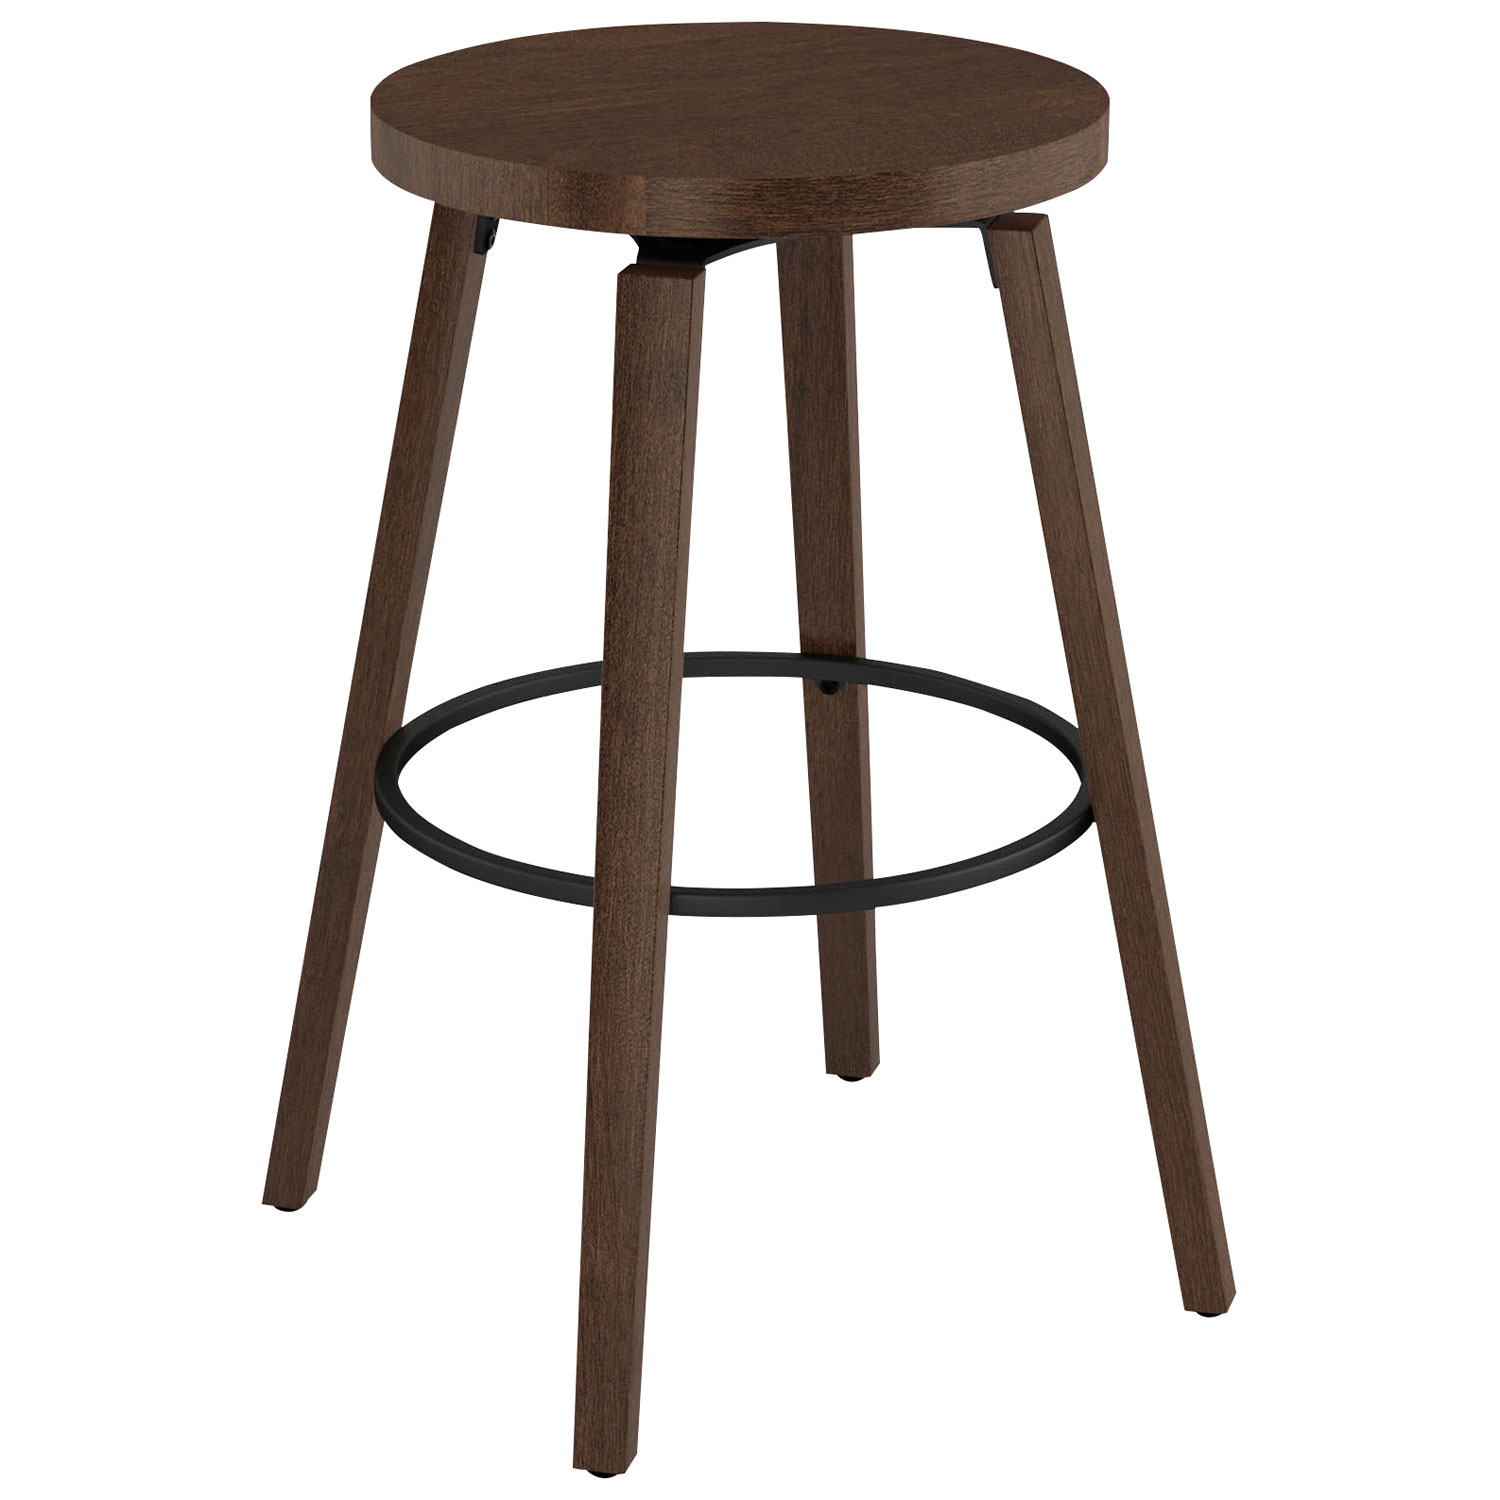 Ravi Rustic Country Counter Height Barstool - Brown